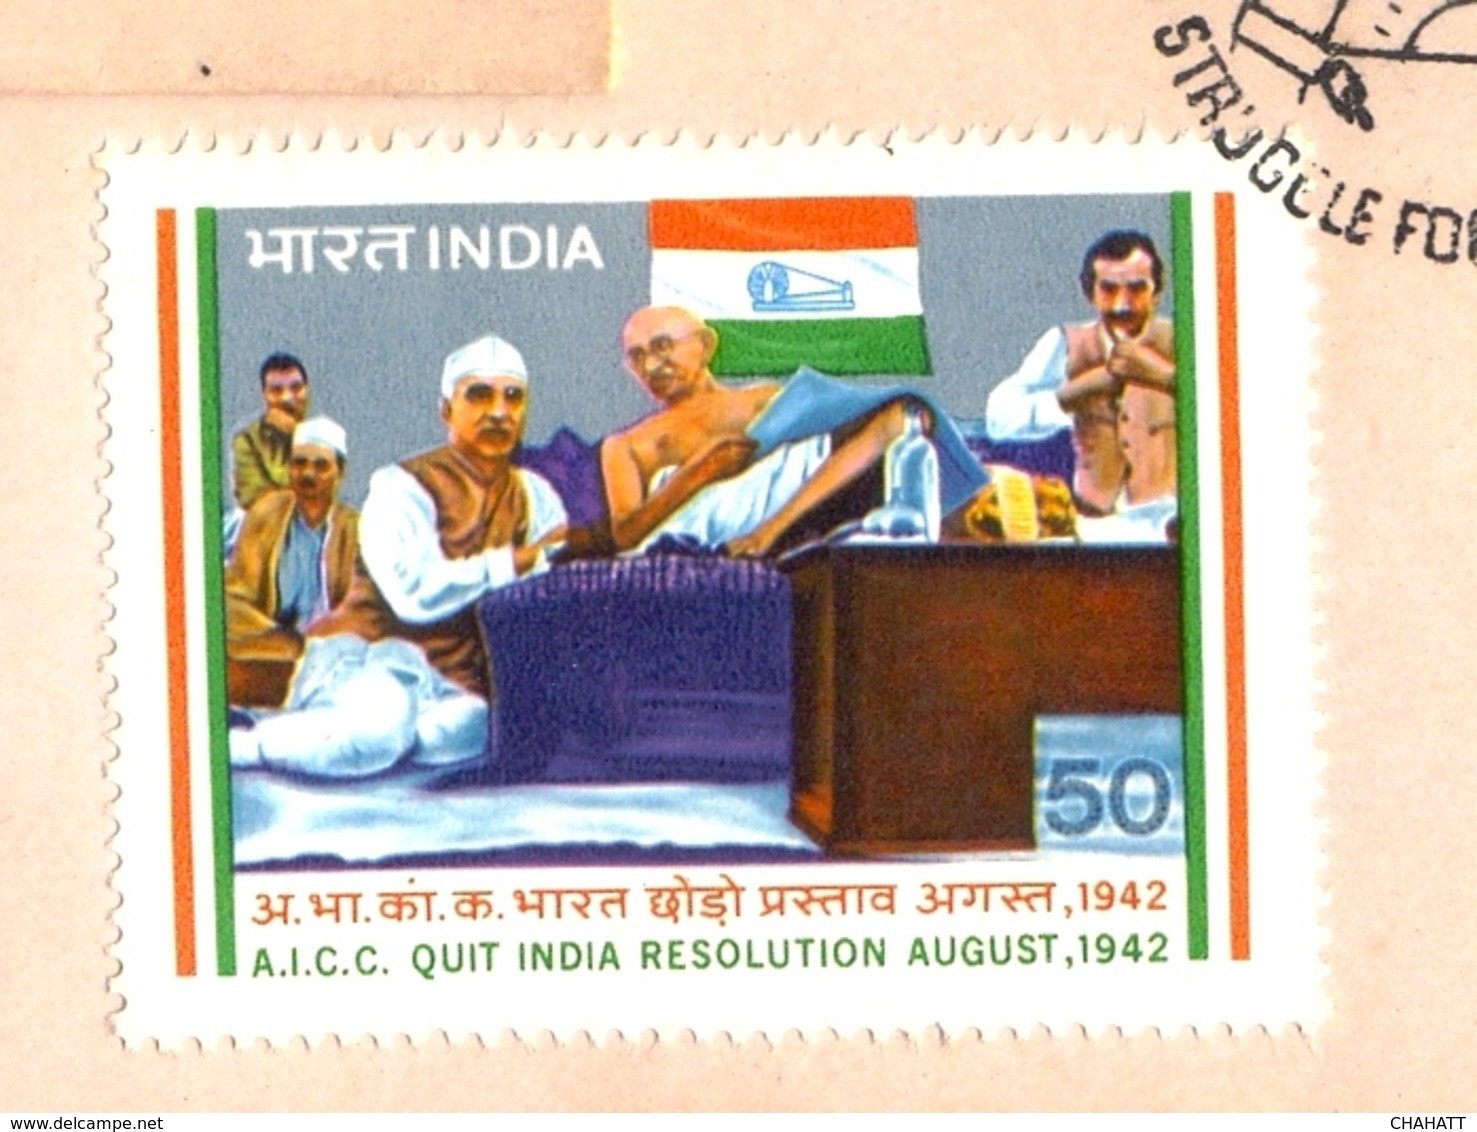 STURGGLE FOR FREEDOM-COMBINATION FDC-SETENANT PAIR ON FDC-INDIA-1983-EFO-SET OF 3 FDCs-BX2-4